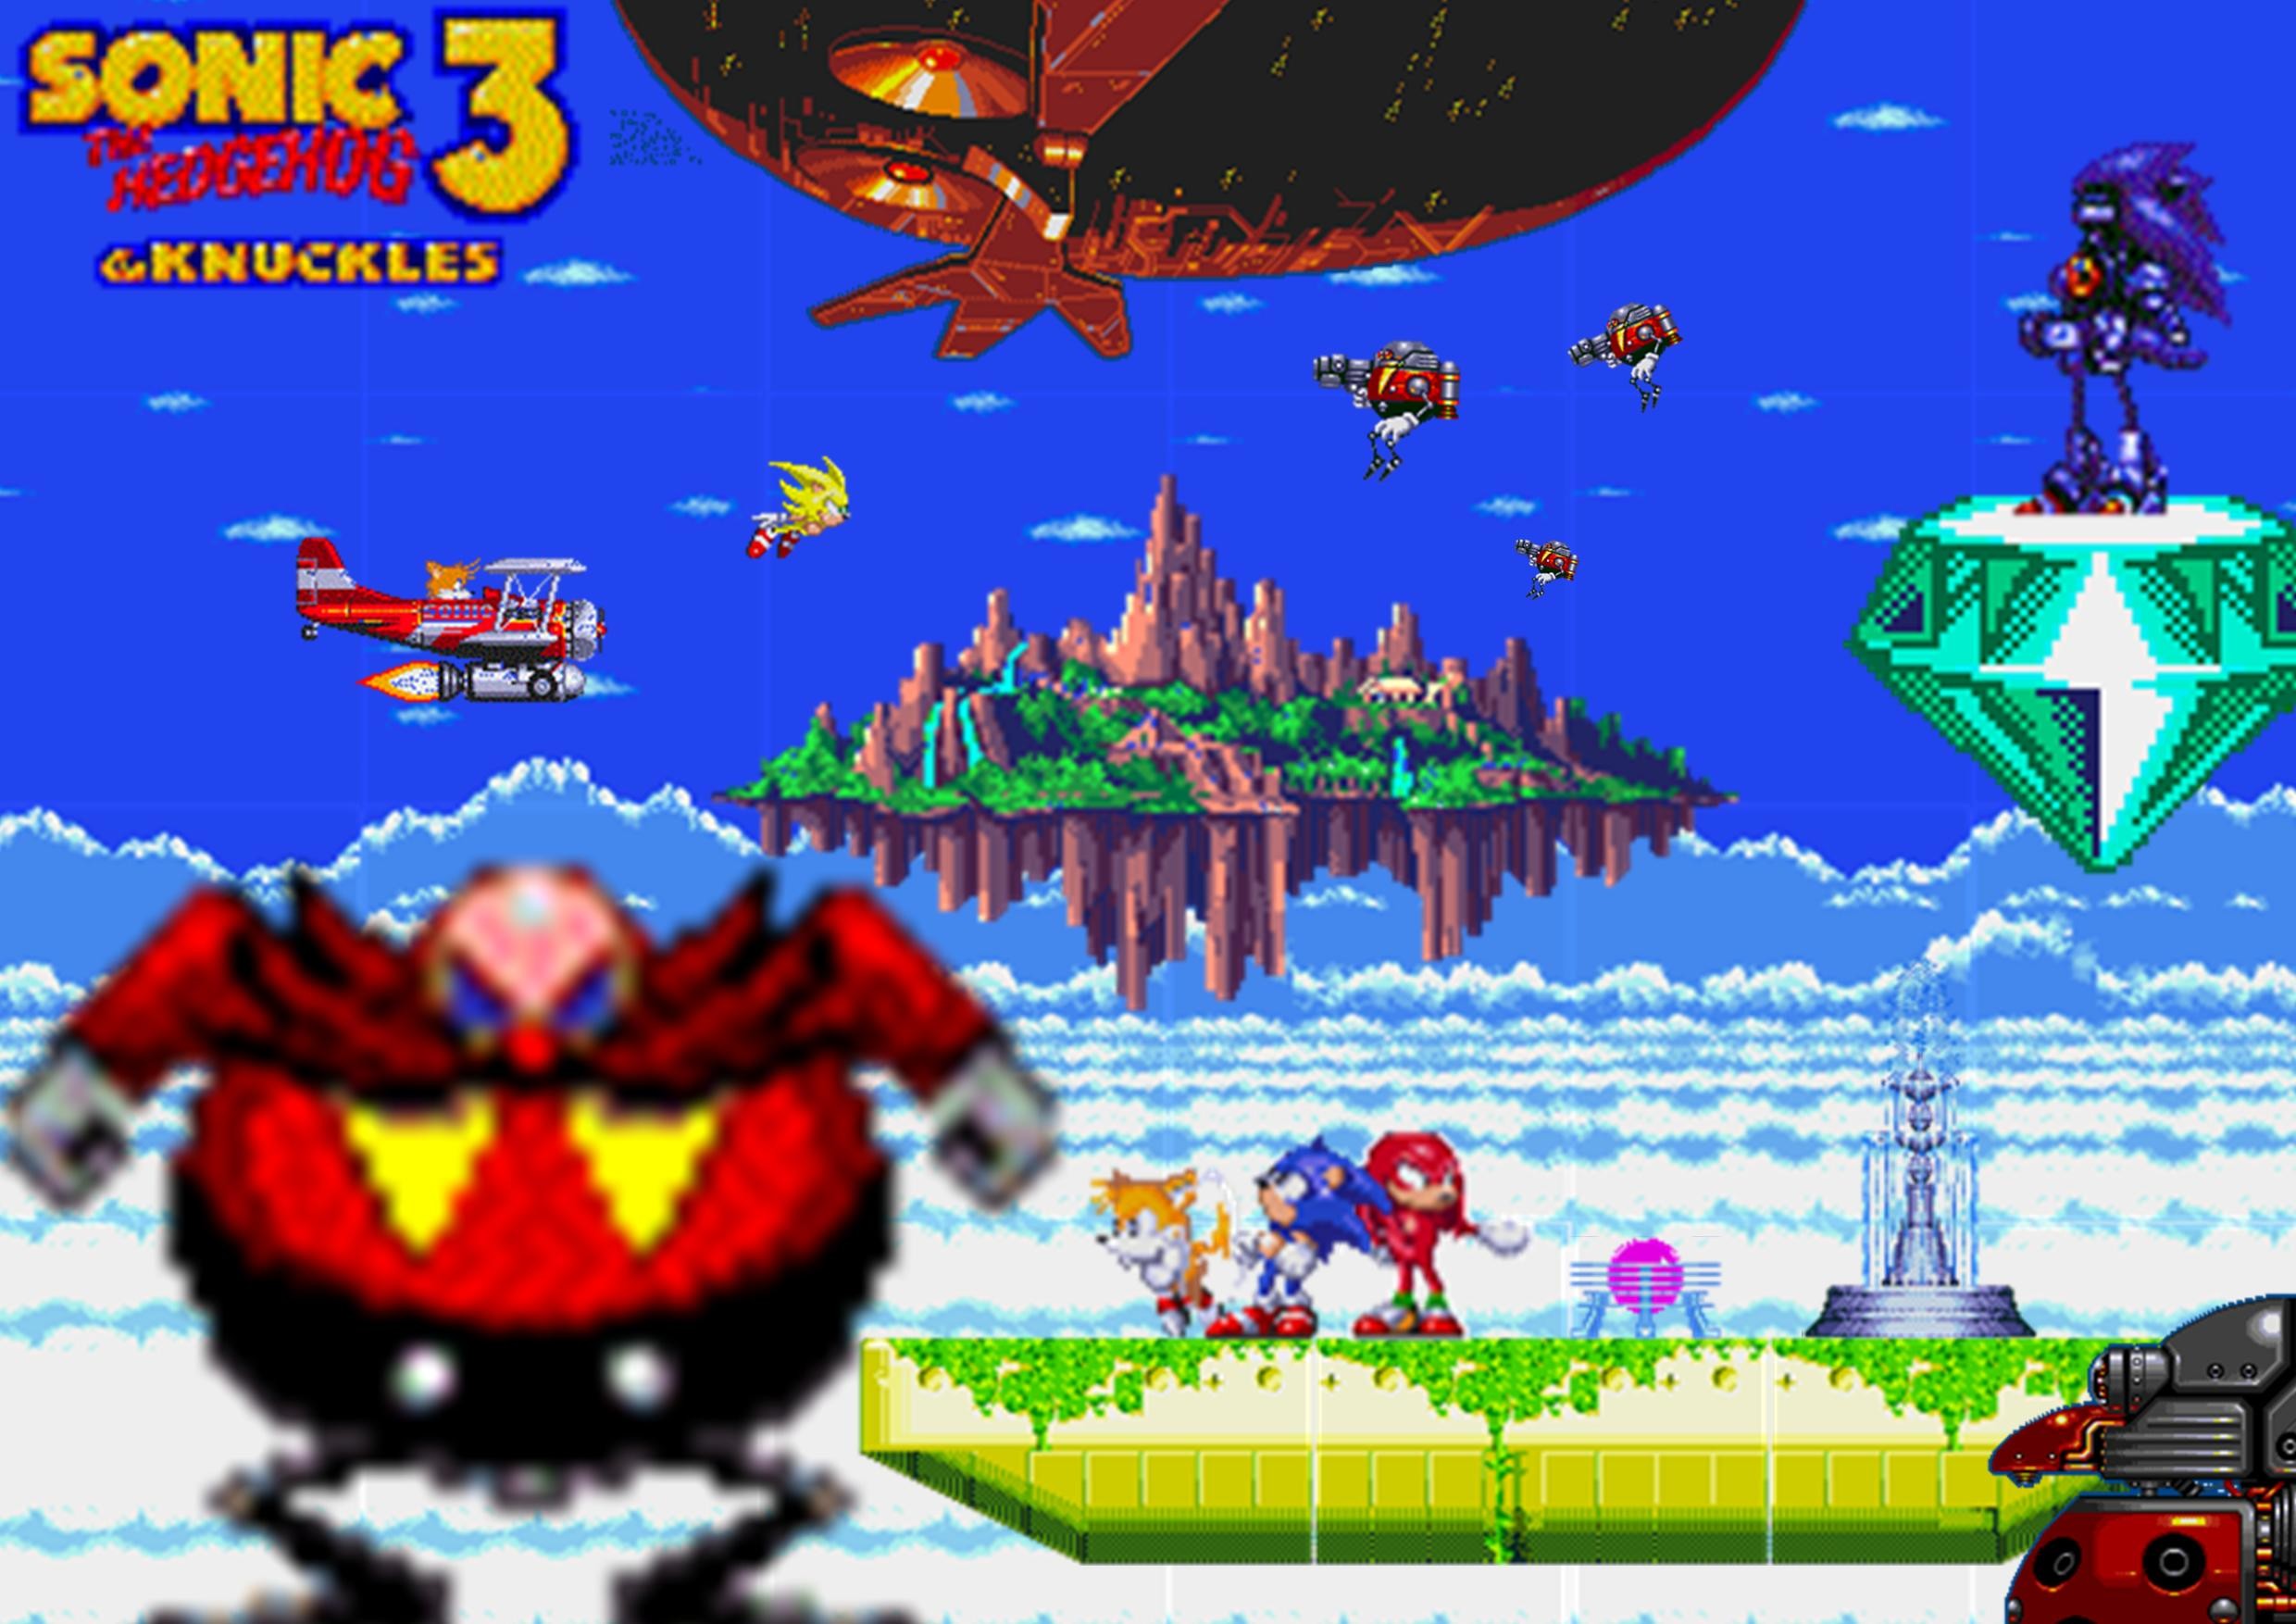 sonic the hedgehog 3 knuckles